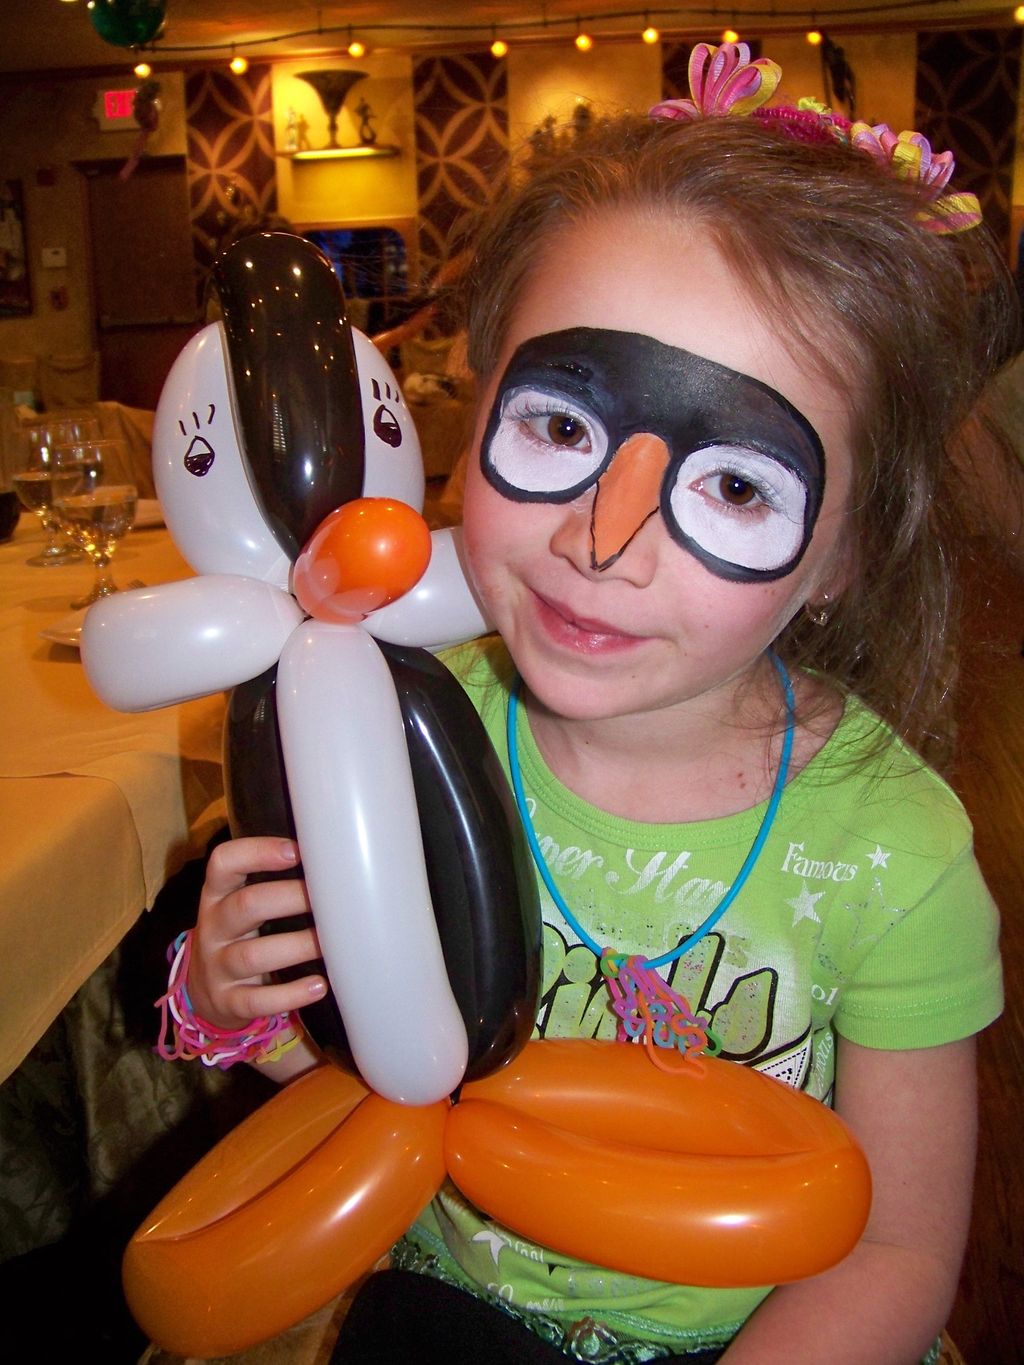 Face Painting and Balloon Art by VeraNik